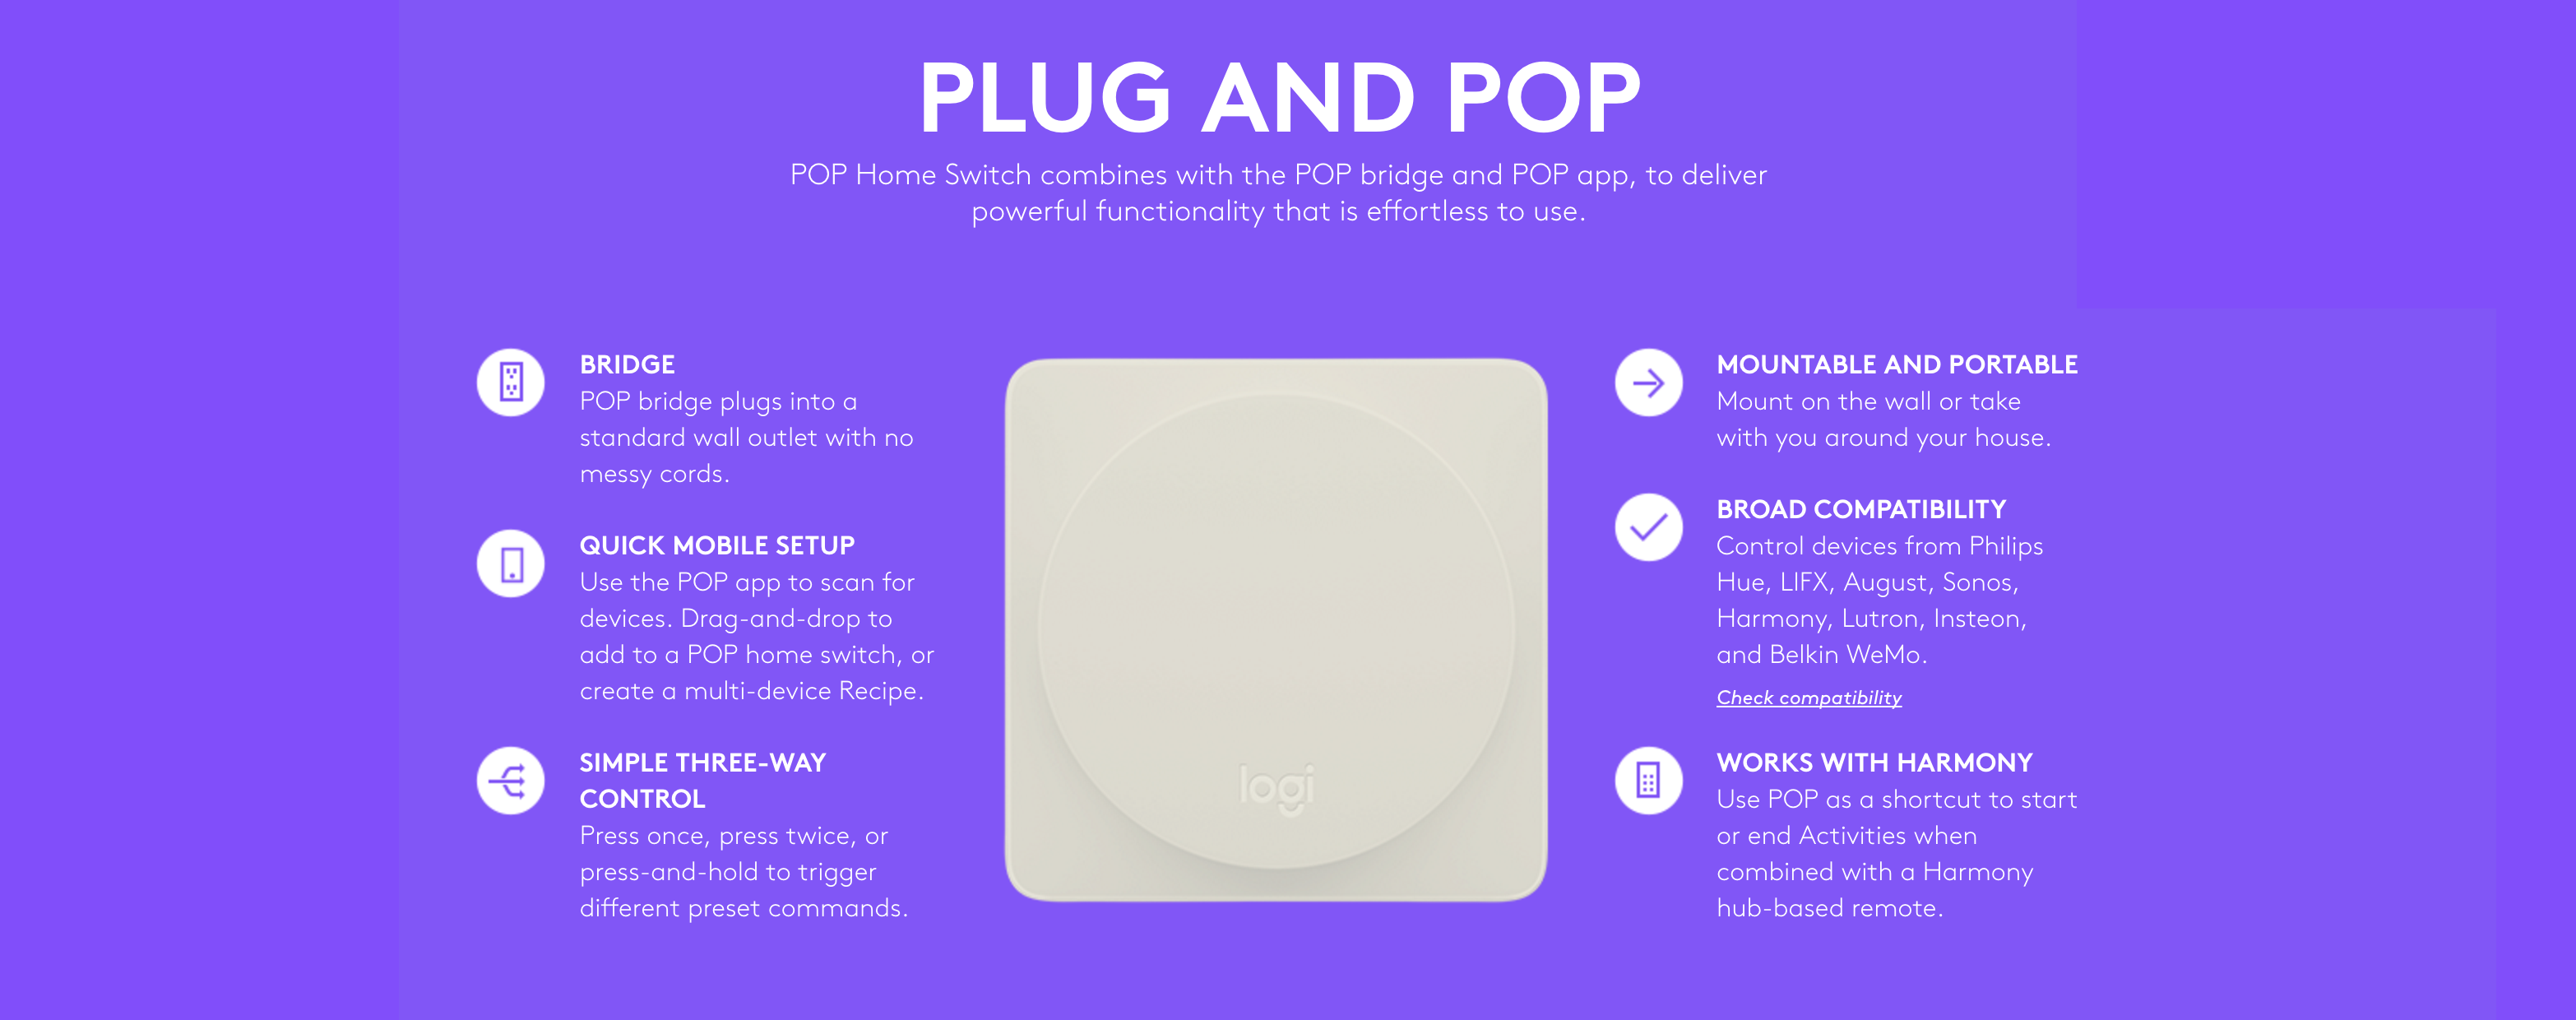 Logitech introduces new Home Switch' accessory for easily controlling smart home devices - 9to5Mac